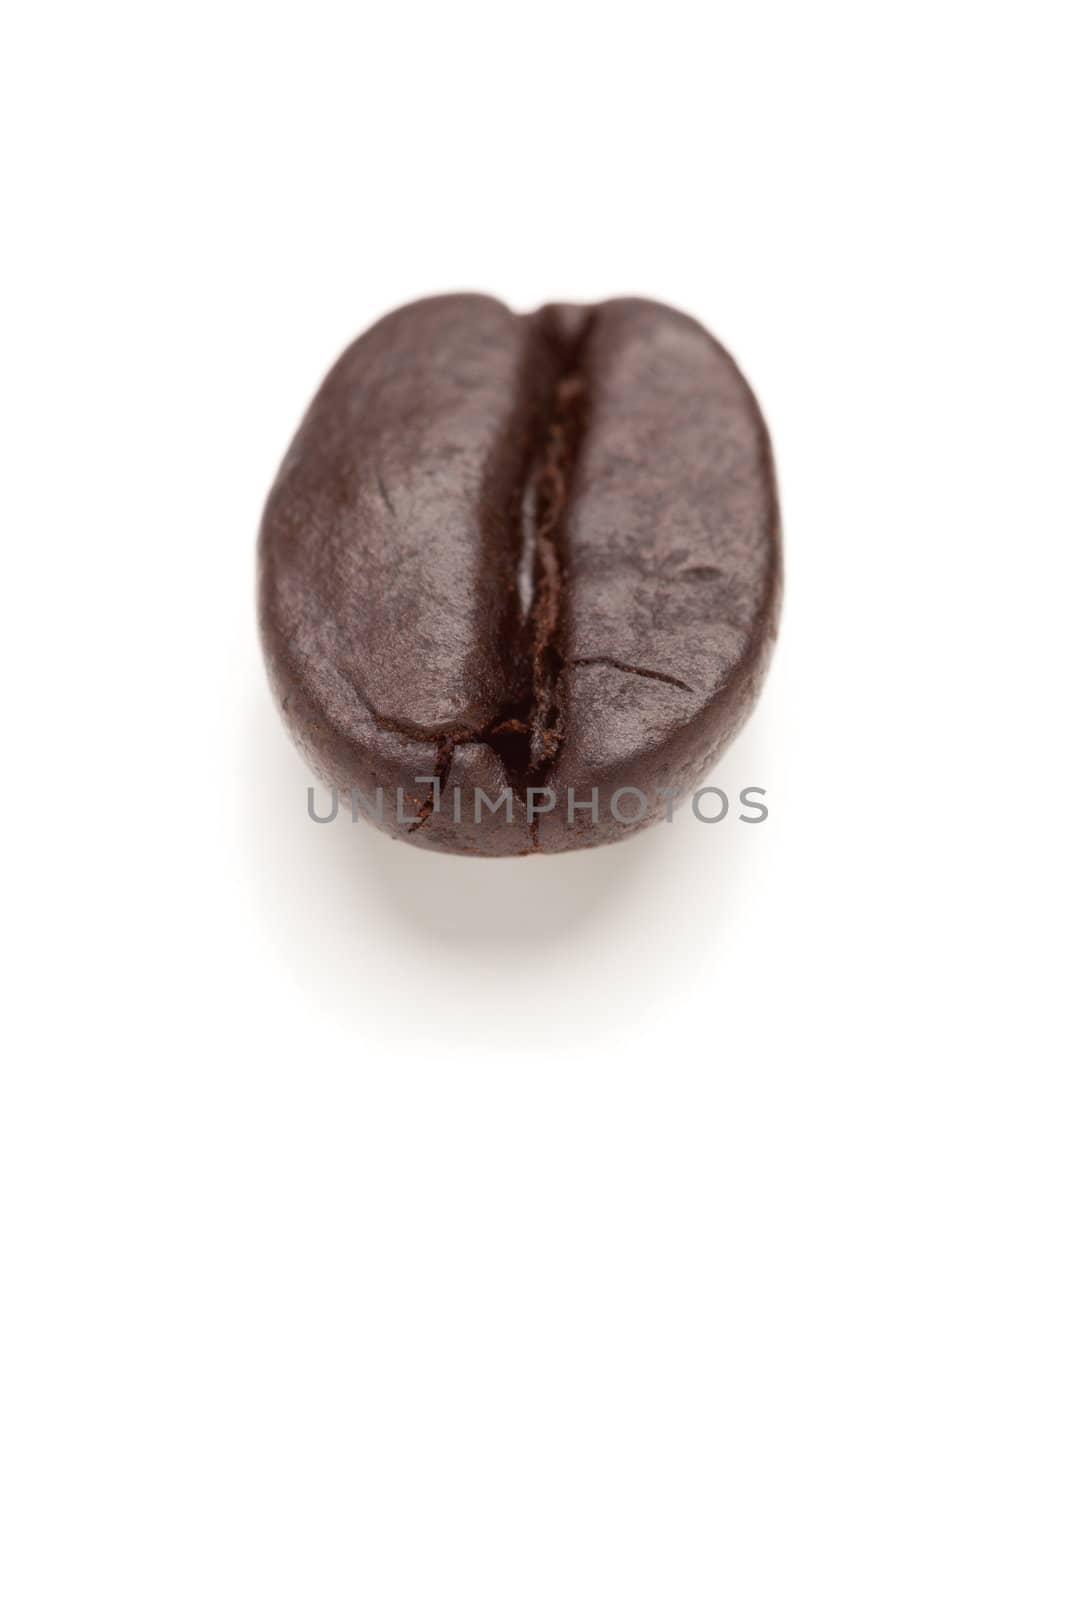 Single Roasted Coffee Bean Isolated on White with Narrow Depth of Field.